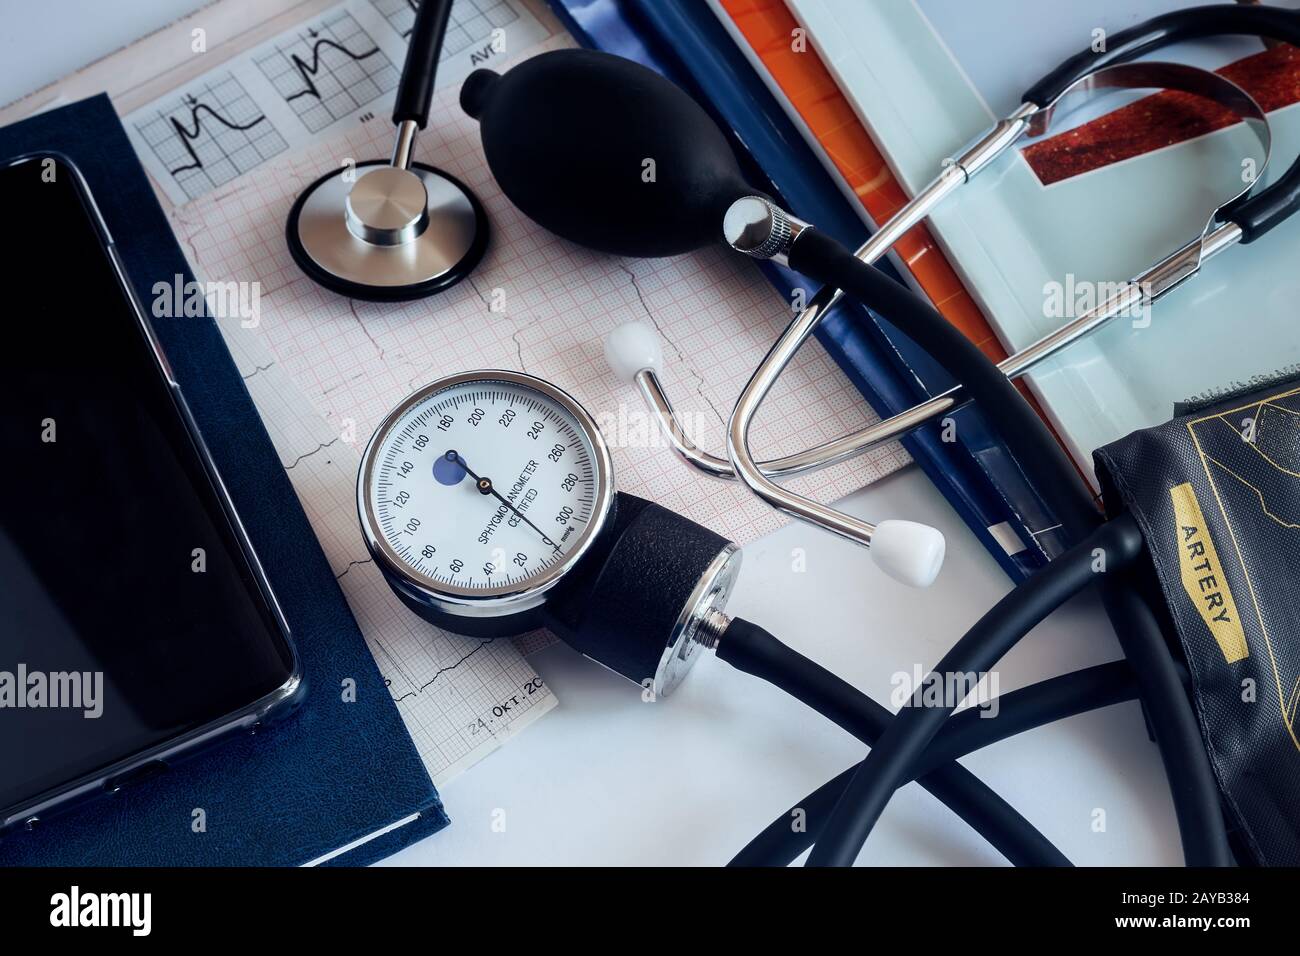 https://c8.alamy.com/comp/2AYB384/medical-devices-a-stethoscope-for-auscultation-of-patients-and-apparatus-for-measuring-of-blood-pressure-2AYB384.jpg